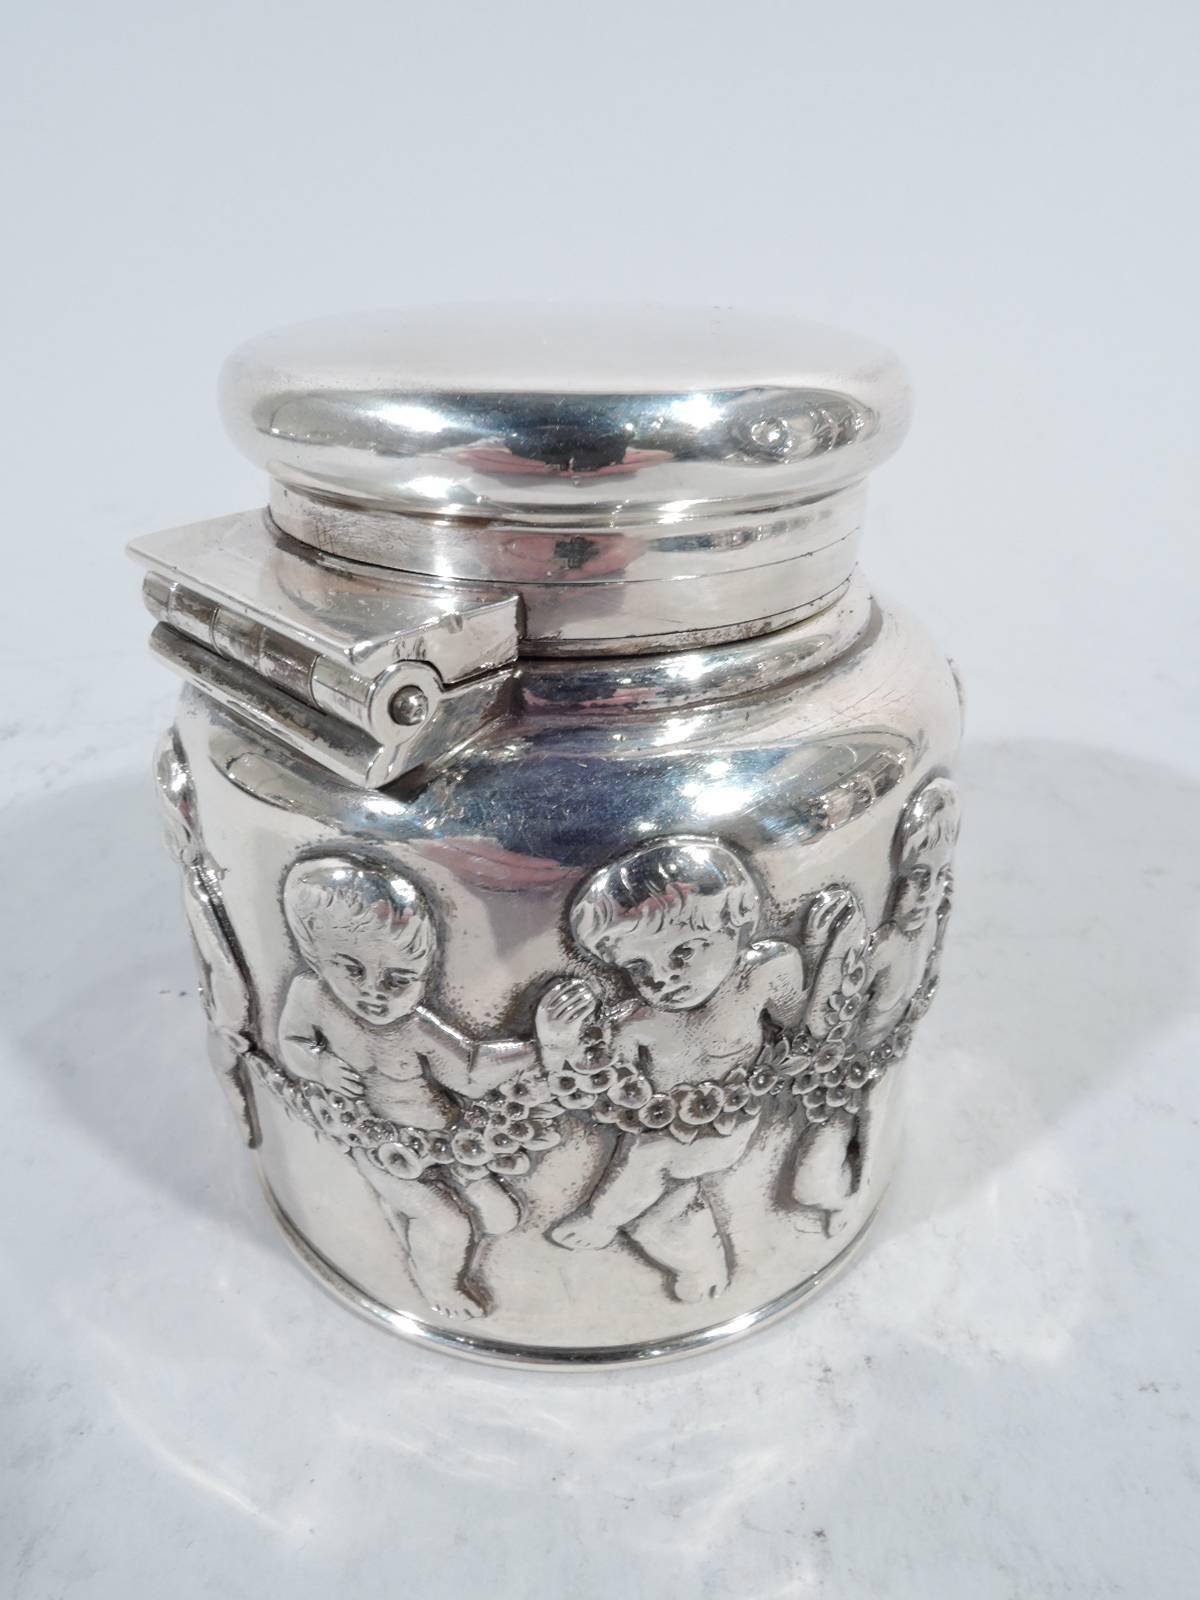 Sterling silver inkwell. Made by Tiffany & Co. in New York. Drum-form with hinged and cork-lined bayonet cover. Exterior encircled with charming chubby cherubs holding a strategically placed garland. Interior lined with clear glass. On underside is